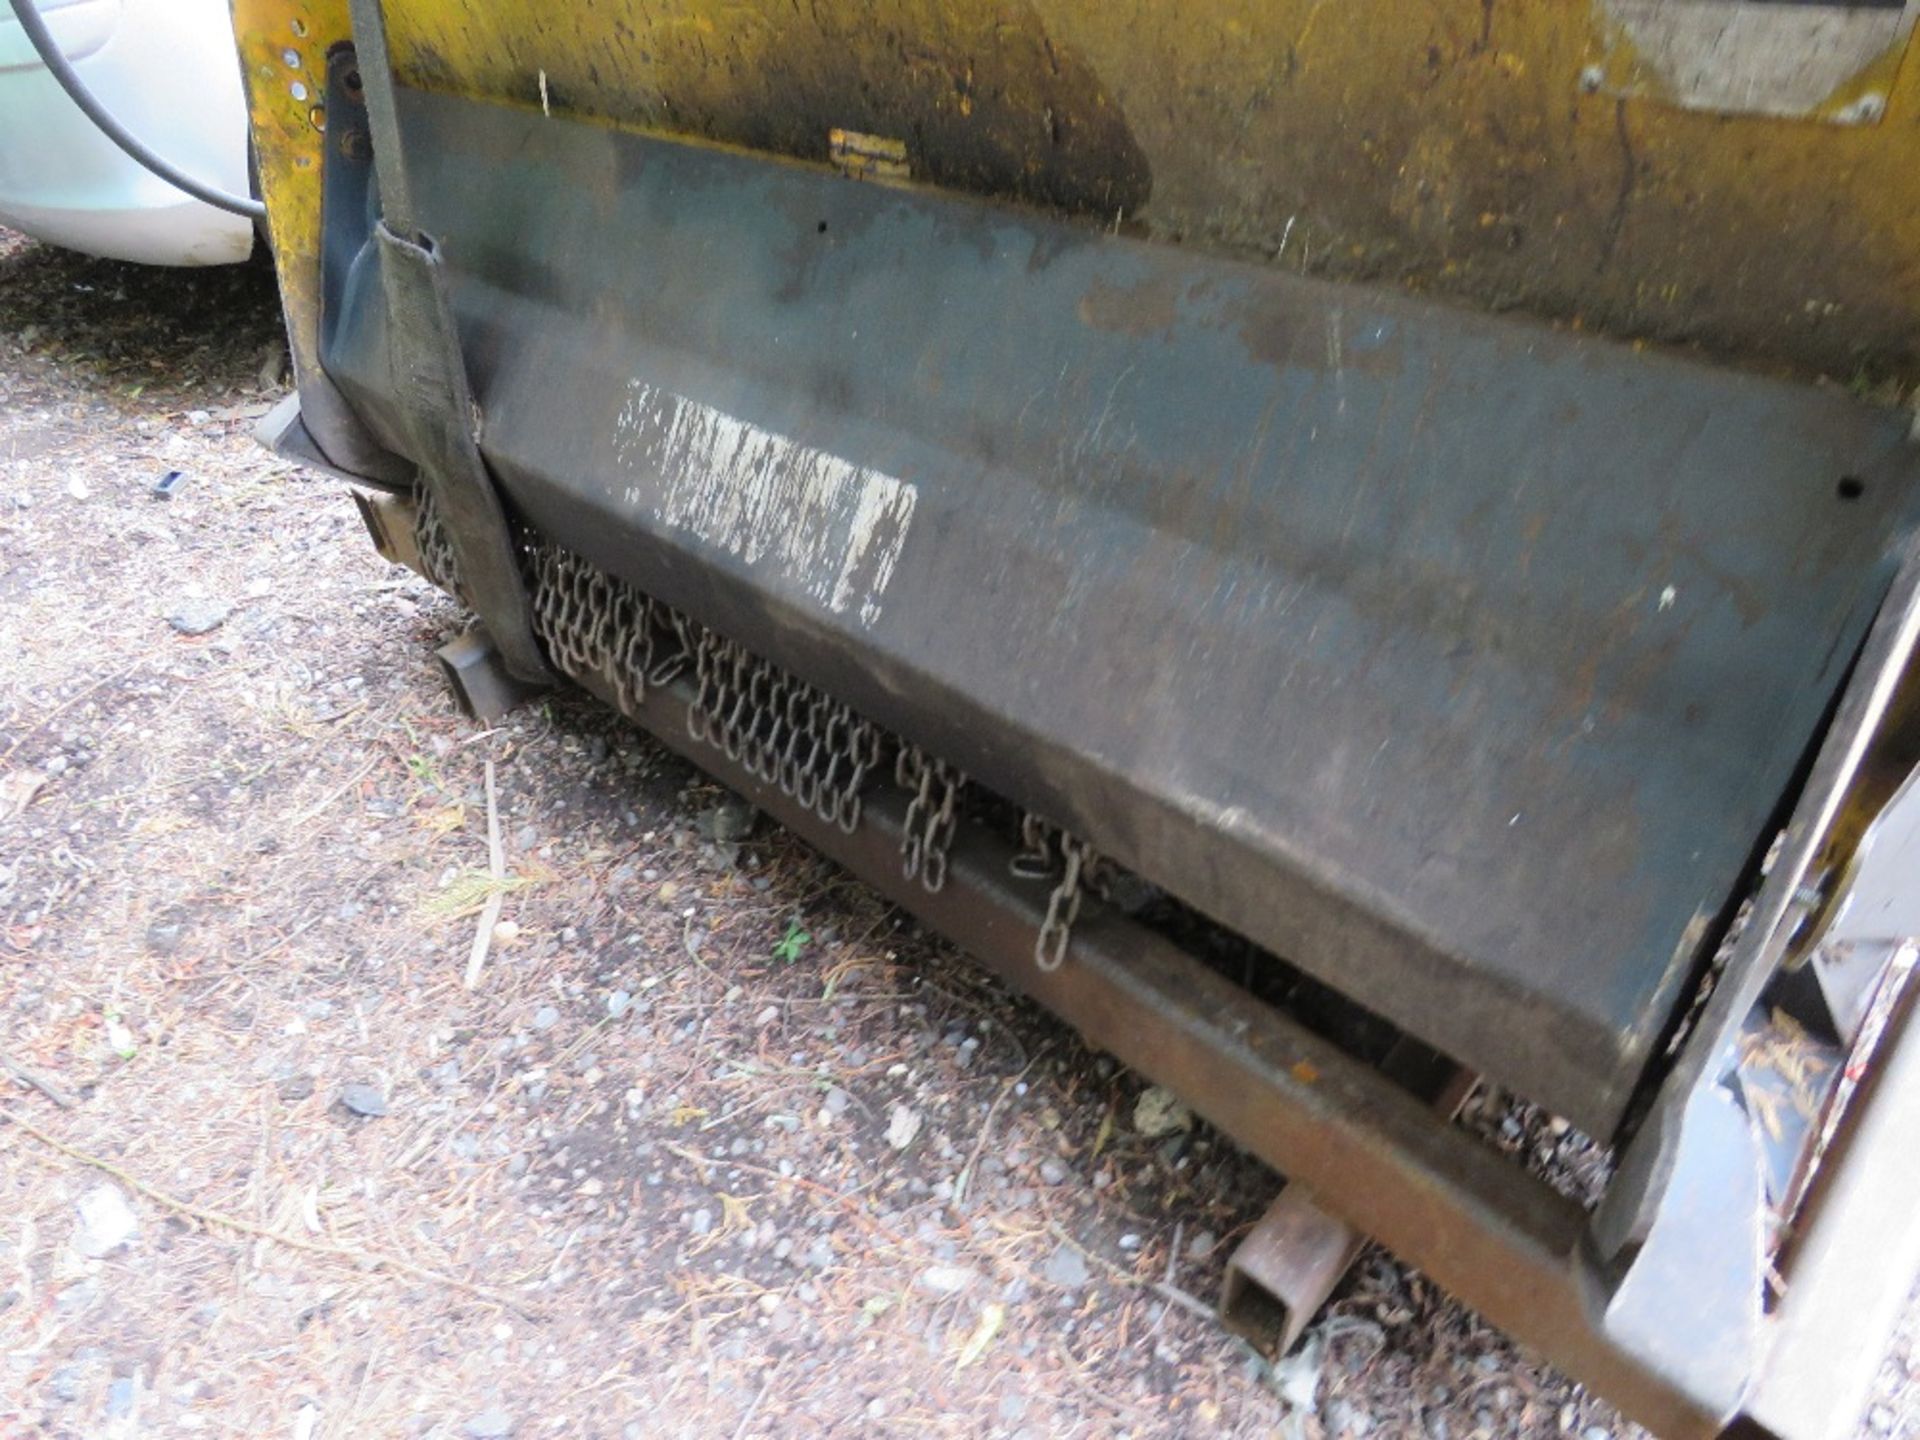 FEMAC EXCAVATOR MOUNTED HEAVY DUTY FLAIL HEAD ON 80MM PINS. UNTESTED, CONDITION UNKNOWN. - Image 6 of 8